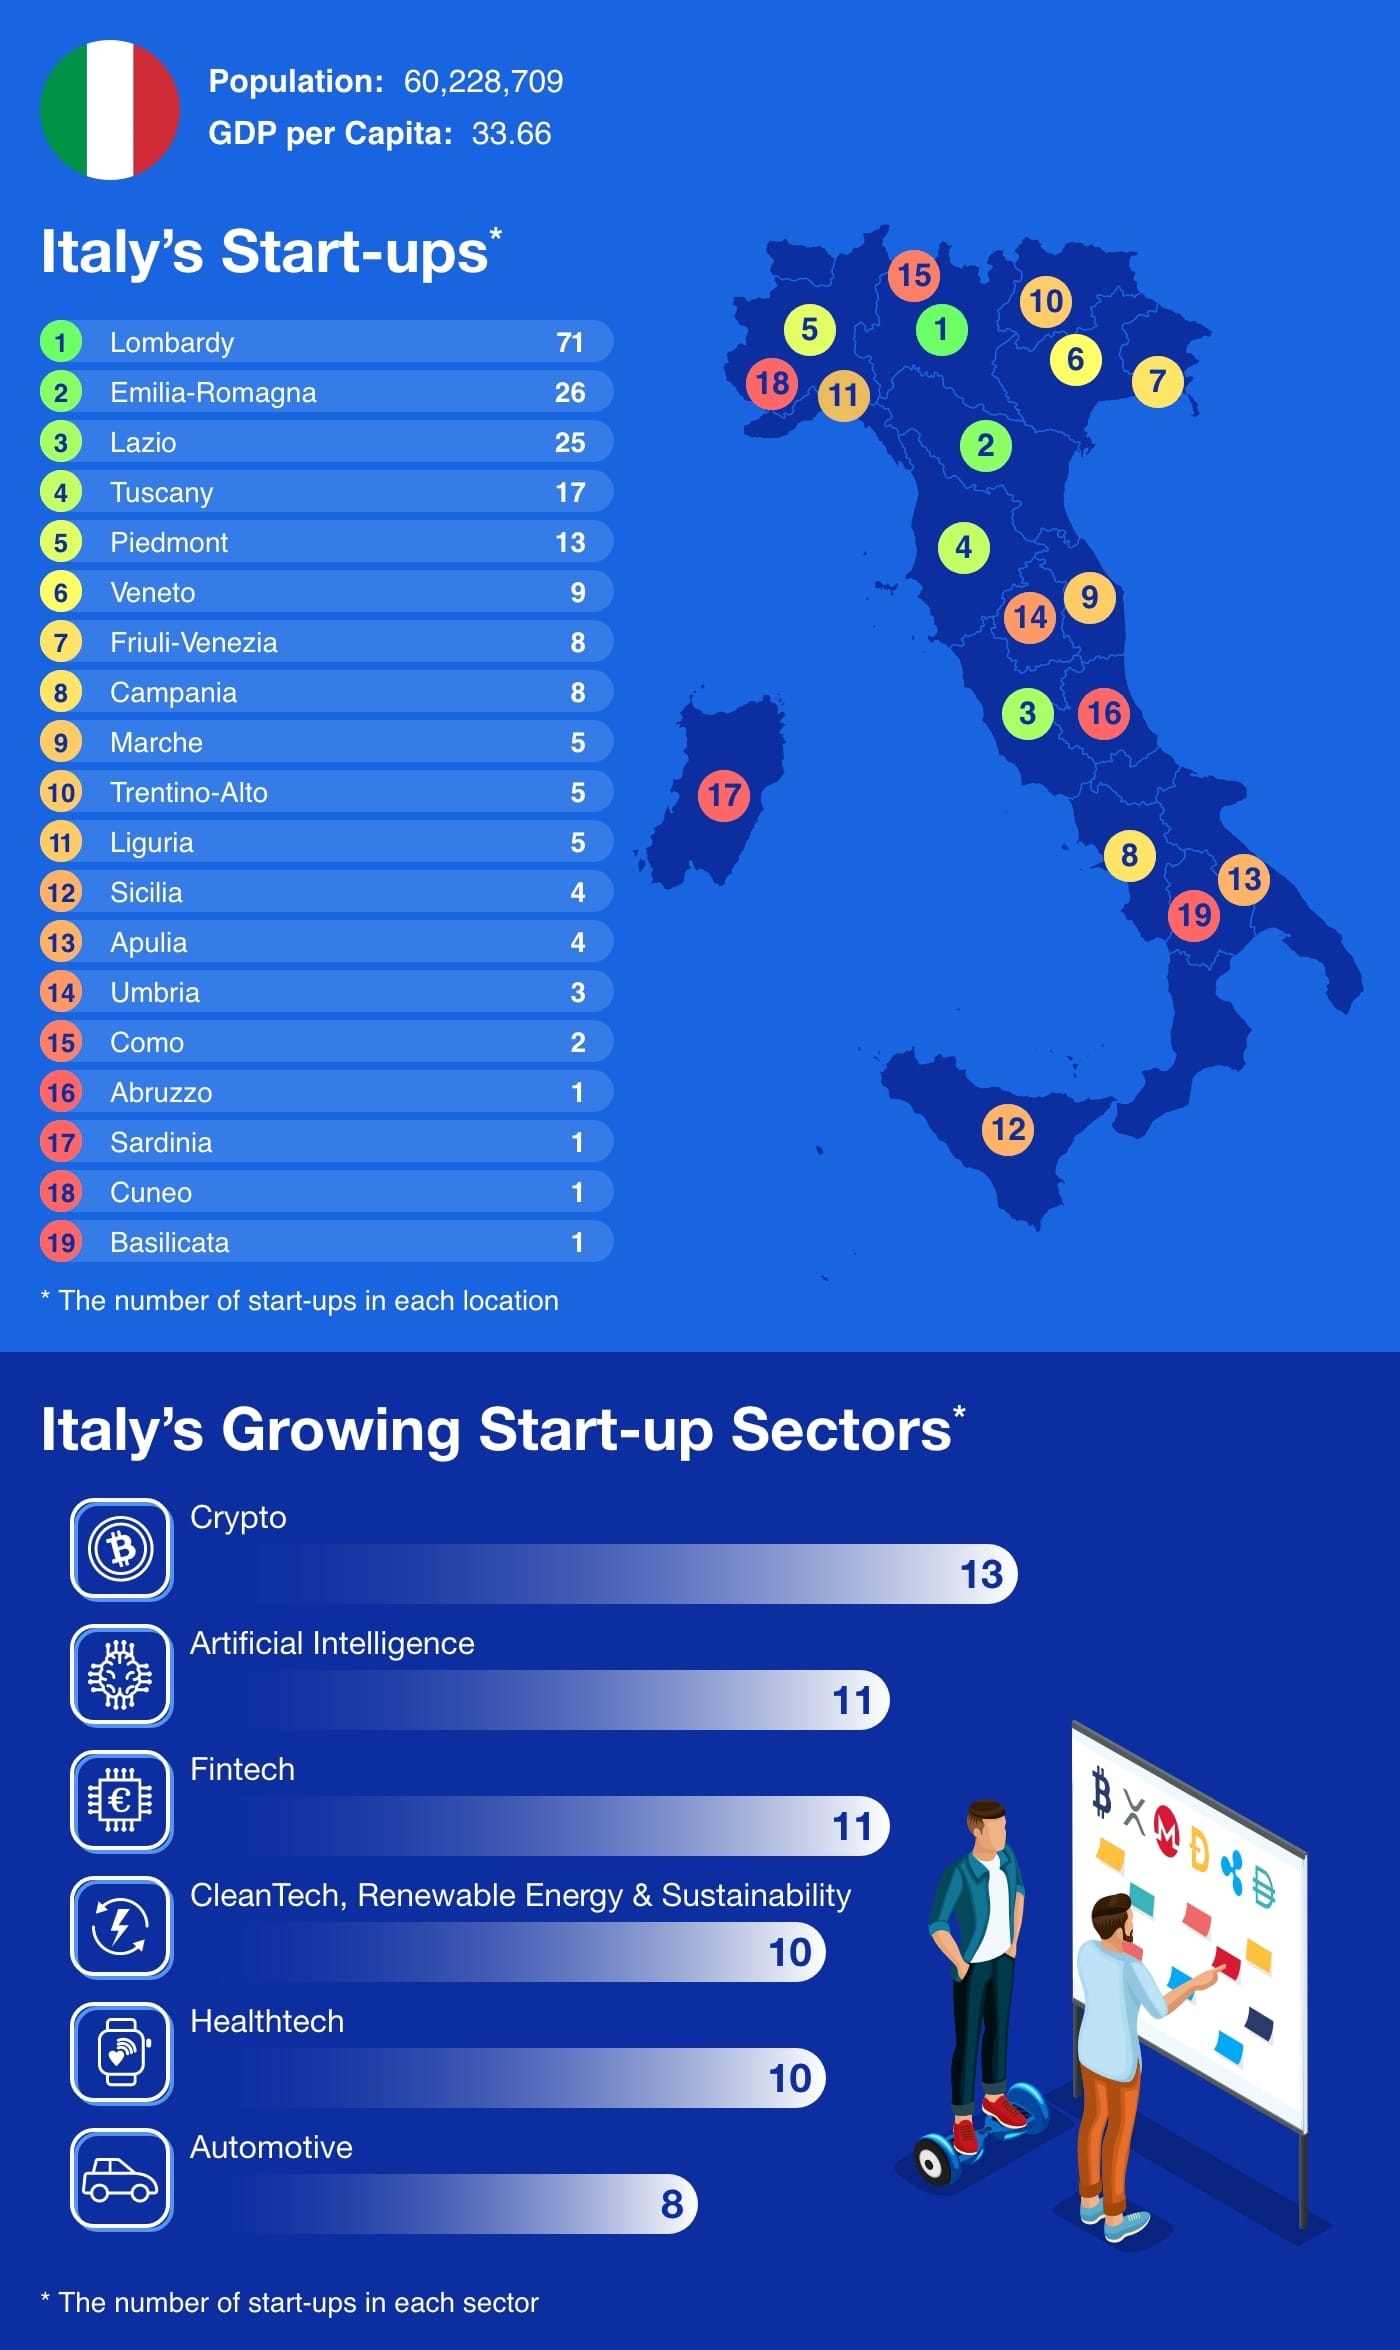 Infographic showing the number of Italy's start-ups by location and sector